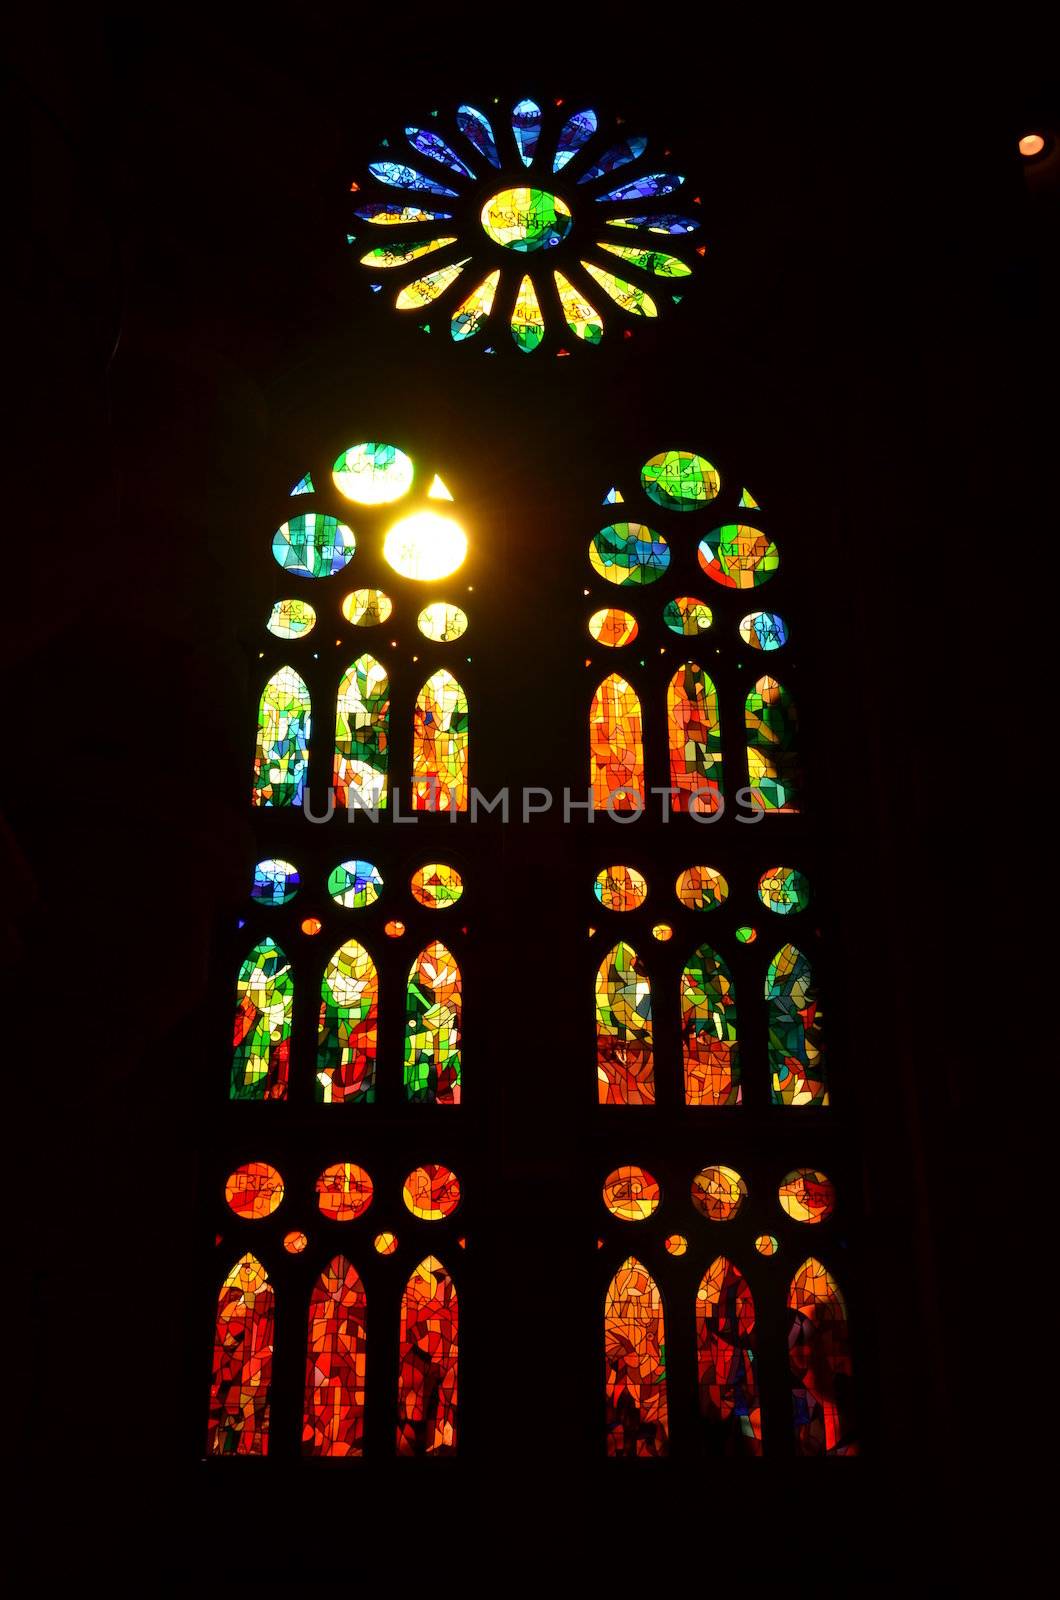 Beautiful arched stained glass window in the Sagrada Familia Cathedral,Barcelona.